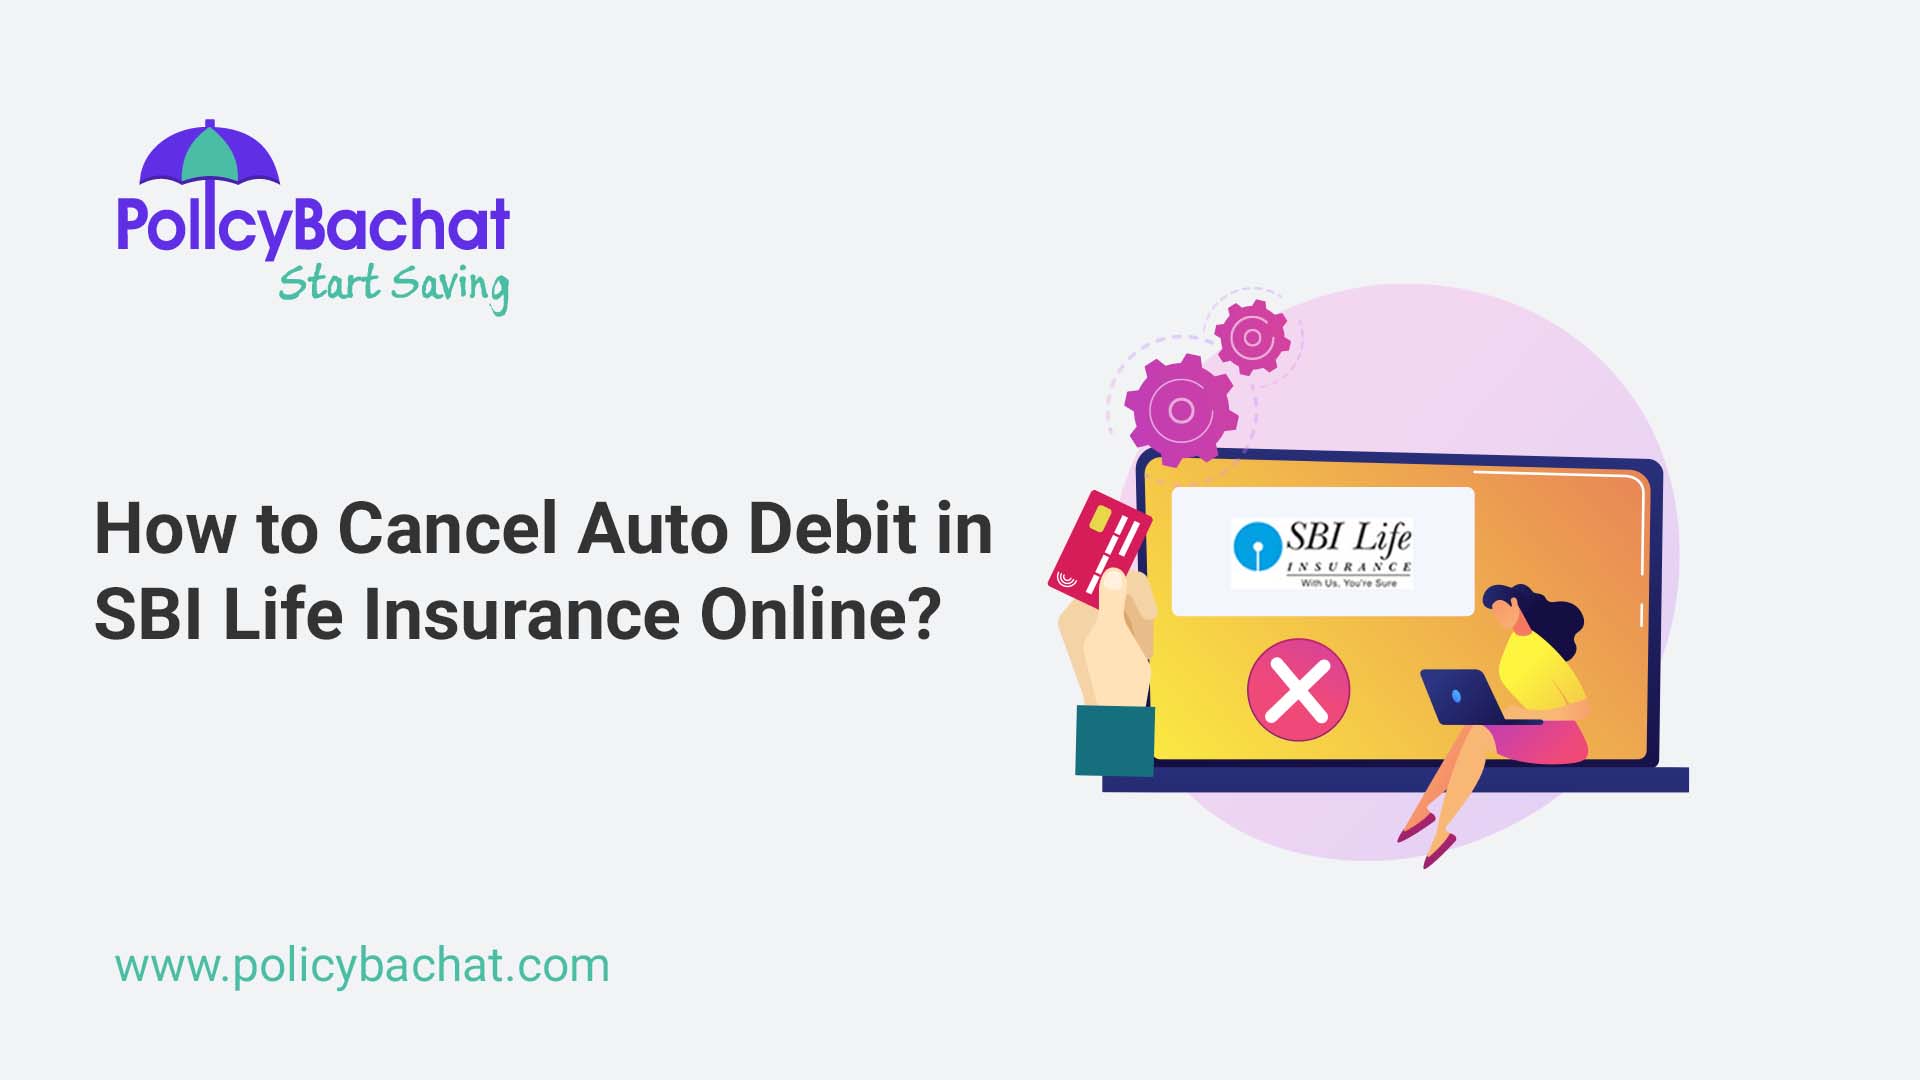 how-to-cancel-auto-debit-in-sbi-life-insurance-online-policybachat